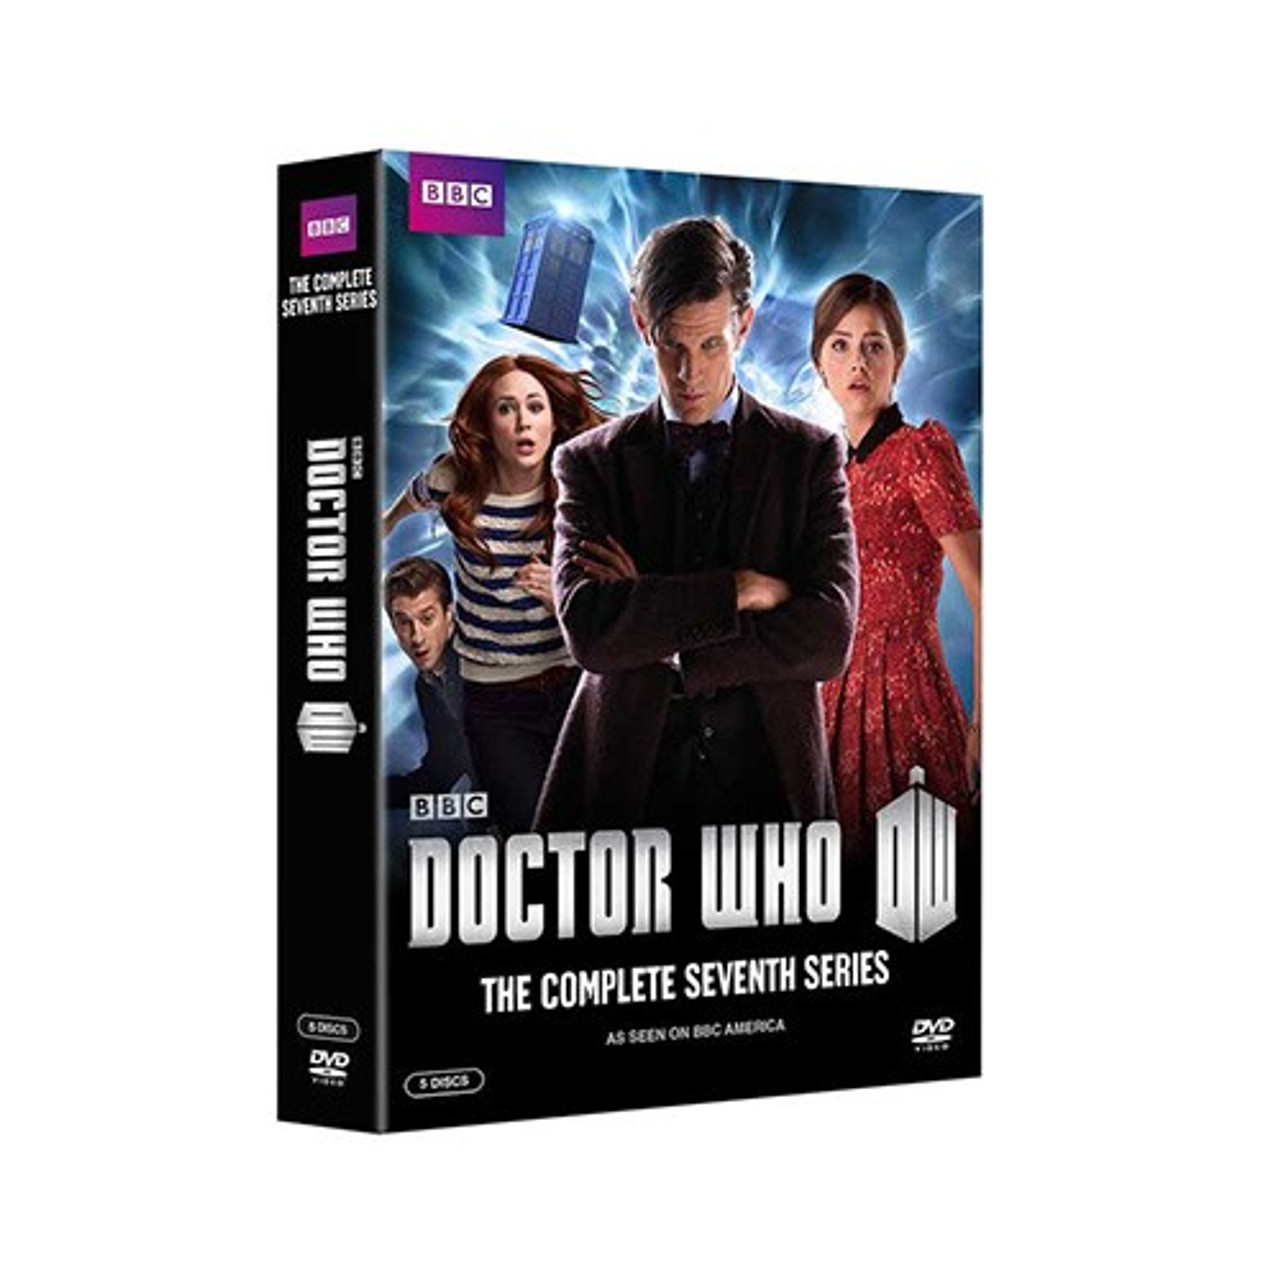 Doctor Who Complete Series 7 DVD Boxed Set - Starring Matt Smith as the  Doctor